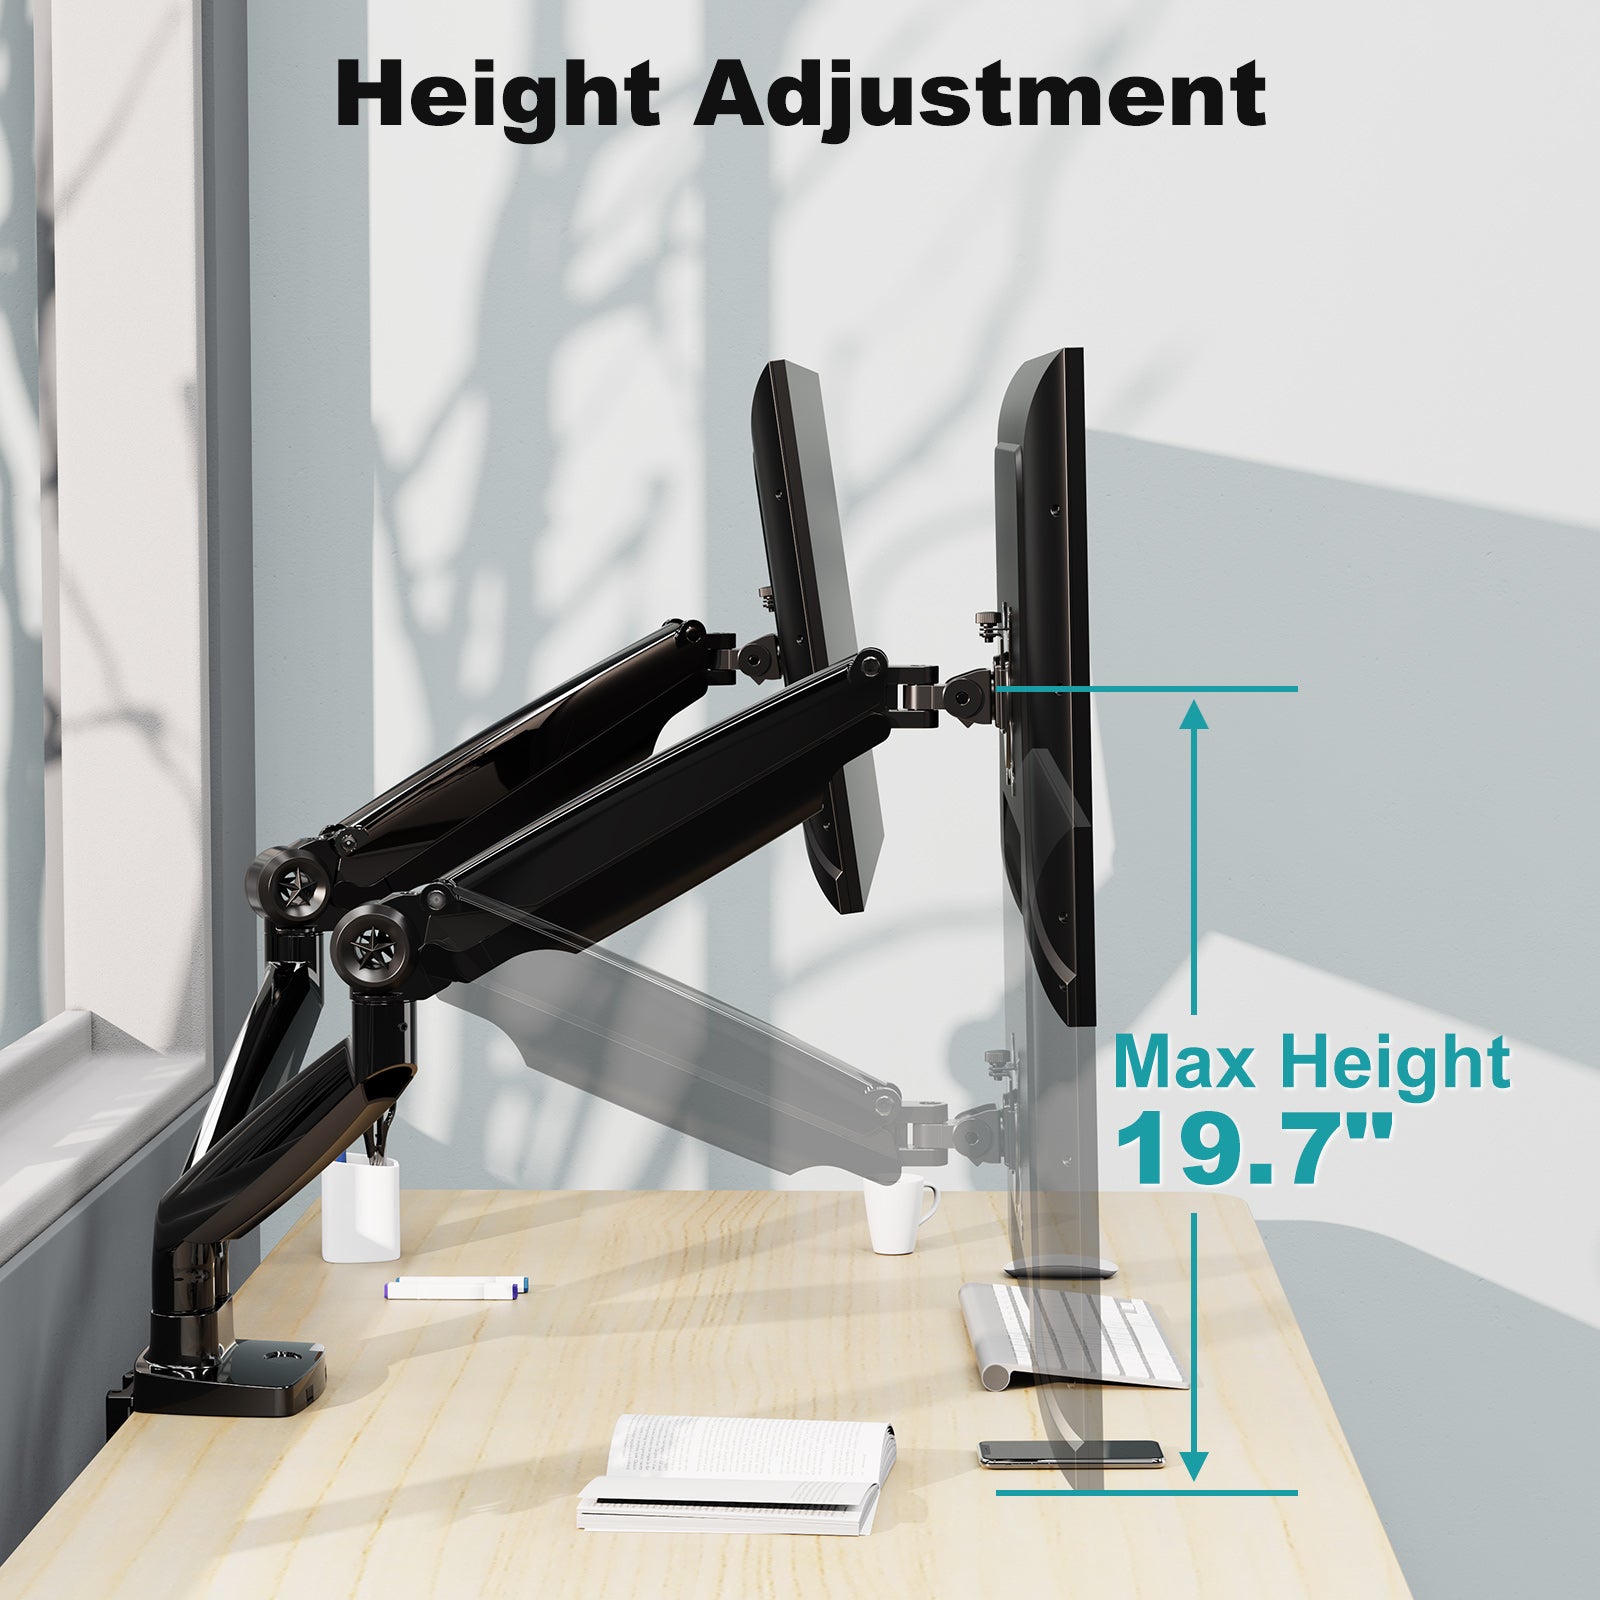 MOUNTUP Ultrawide Dual Monitor Desk Mount for Two Max 35 inch Monitors Height Adjustment